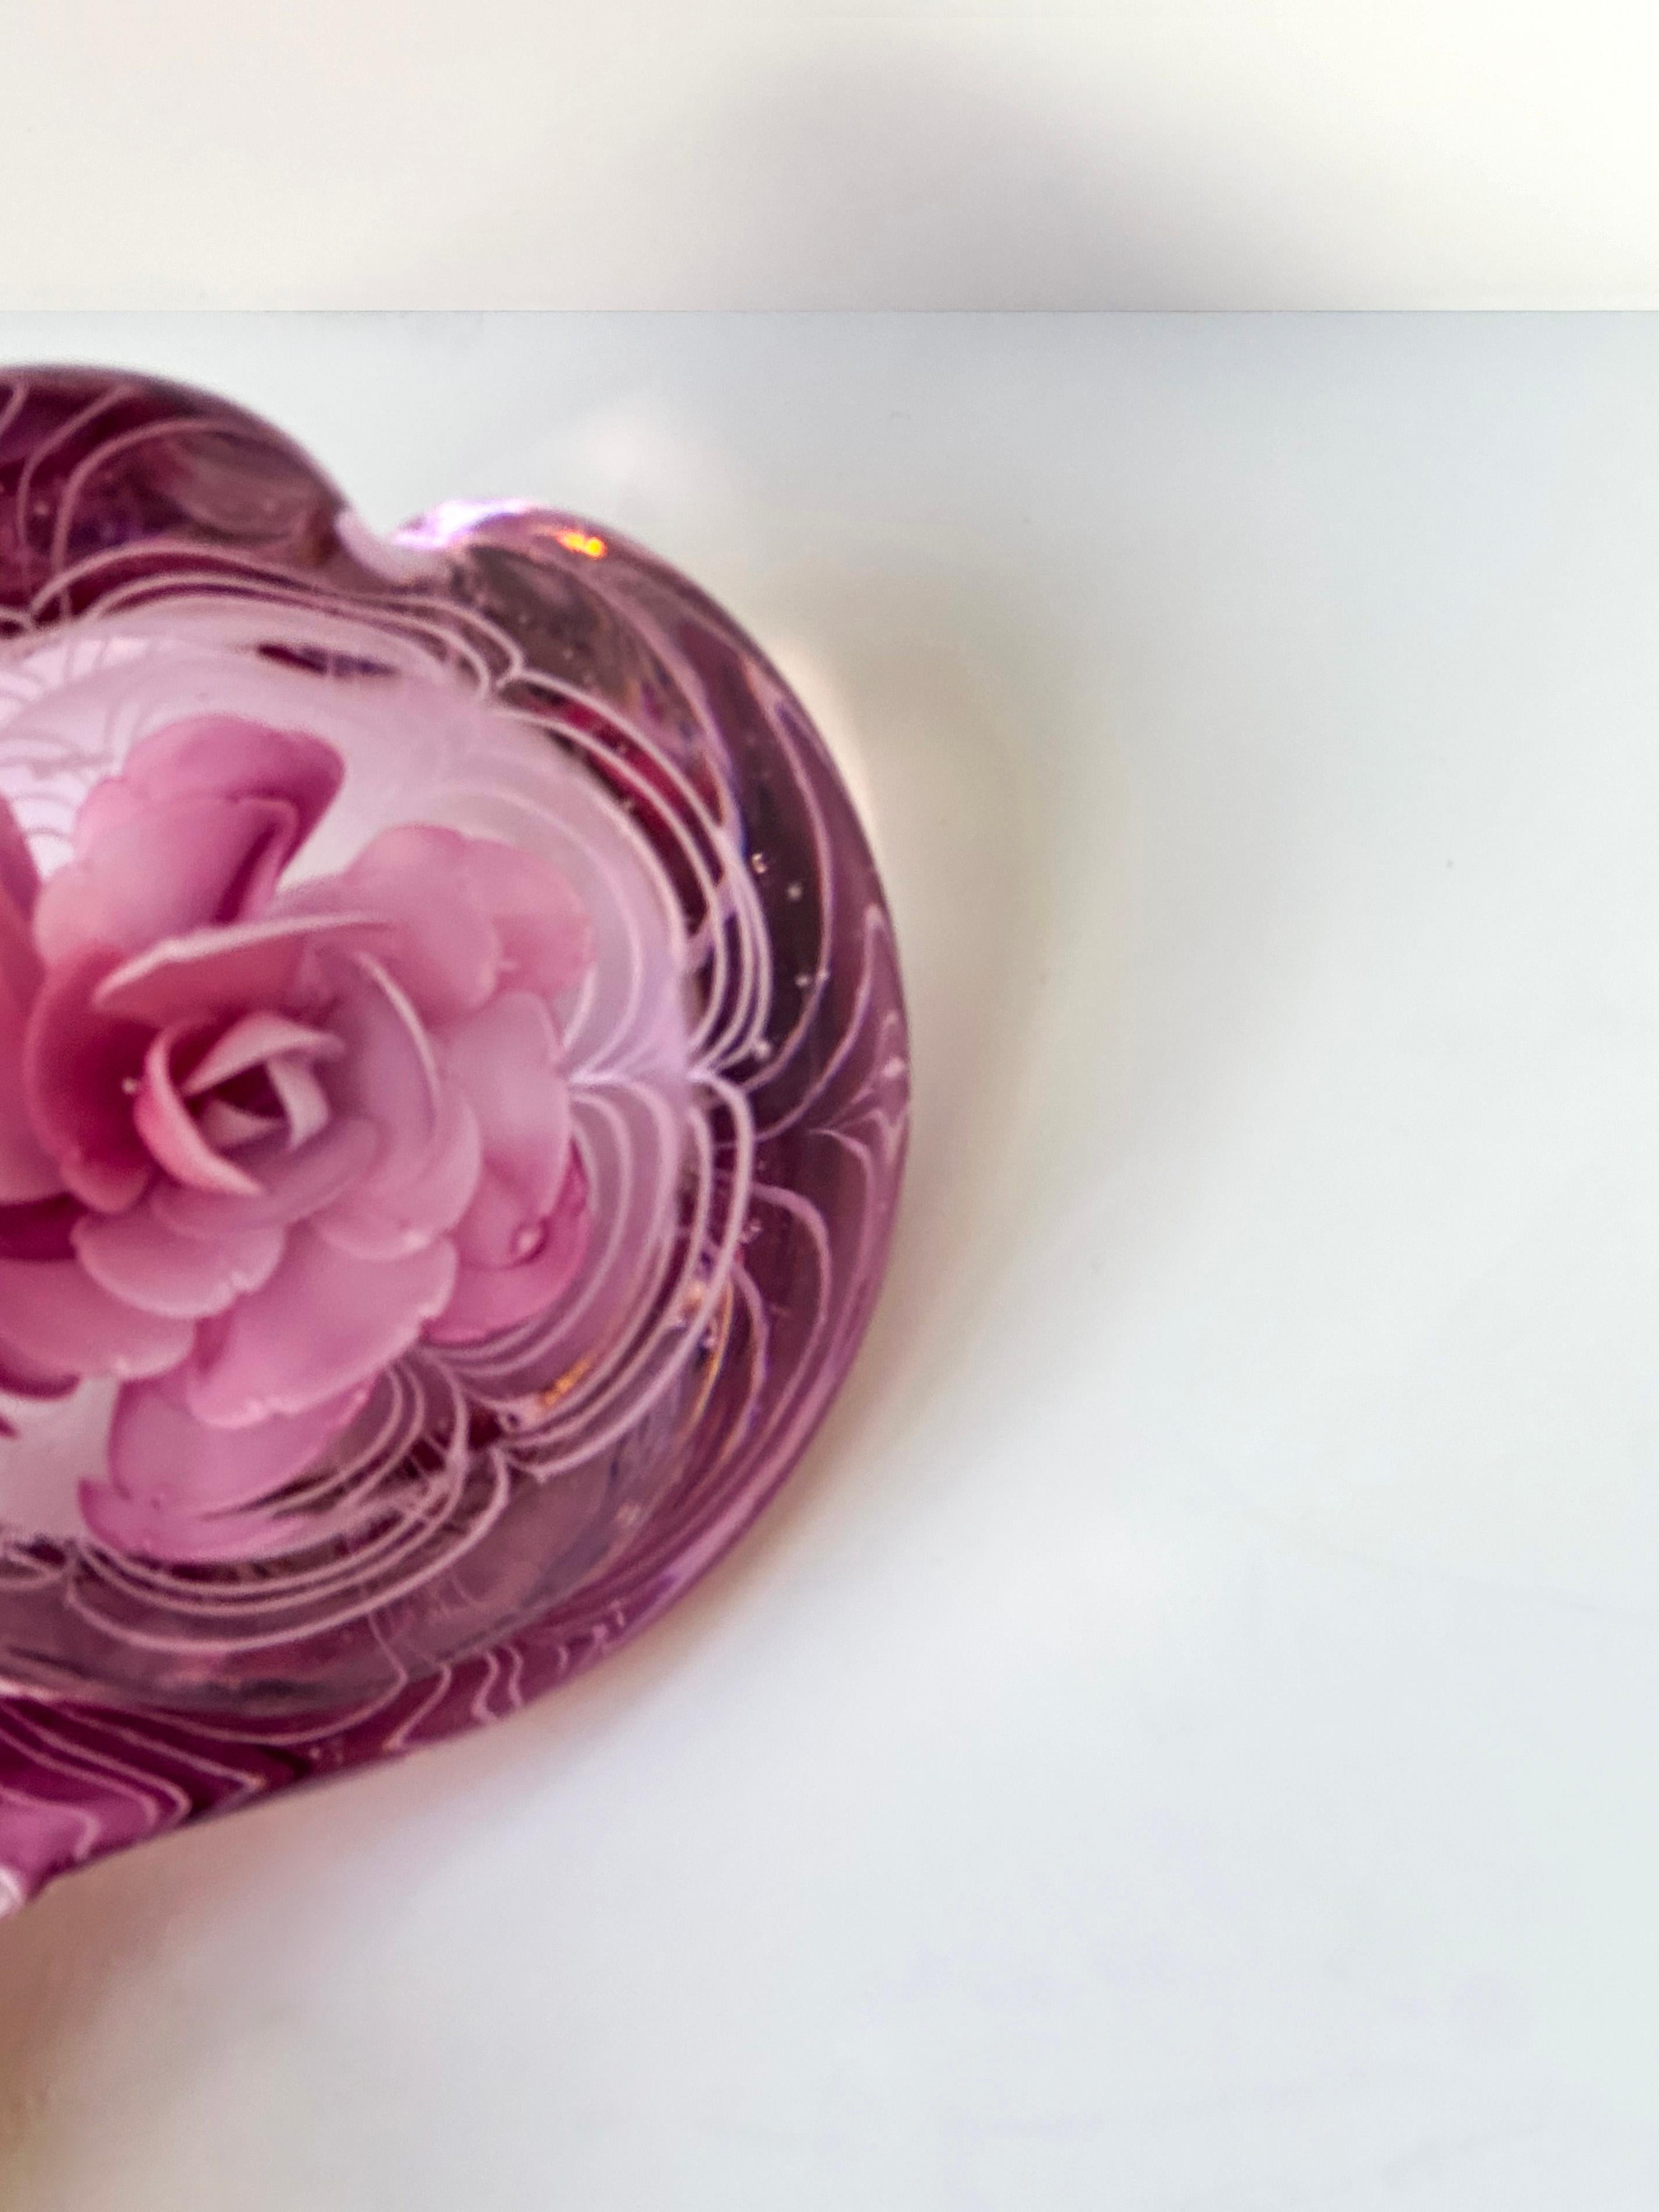 British Vintage Heart Shaped Pink Glass Paperweight with Rose Petal Centre